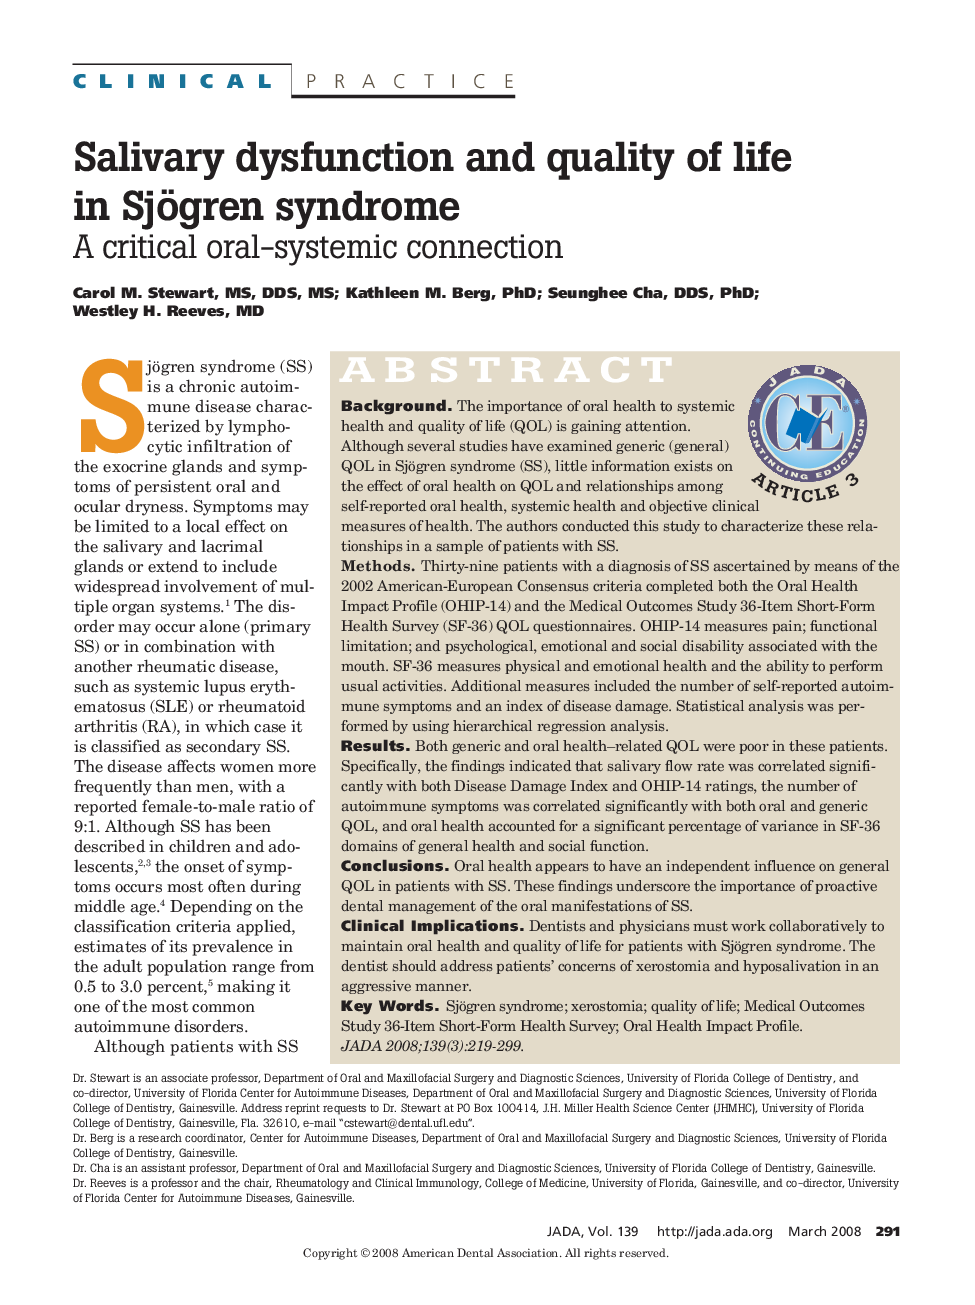 Salivary Dysfunction and Quality of Life in Sjögren Syndrome : A Critical Oral-Systemic Connection